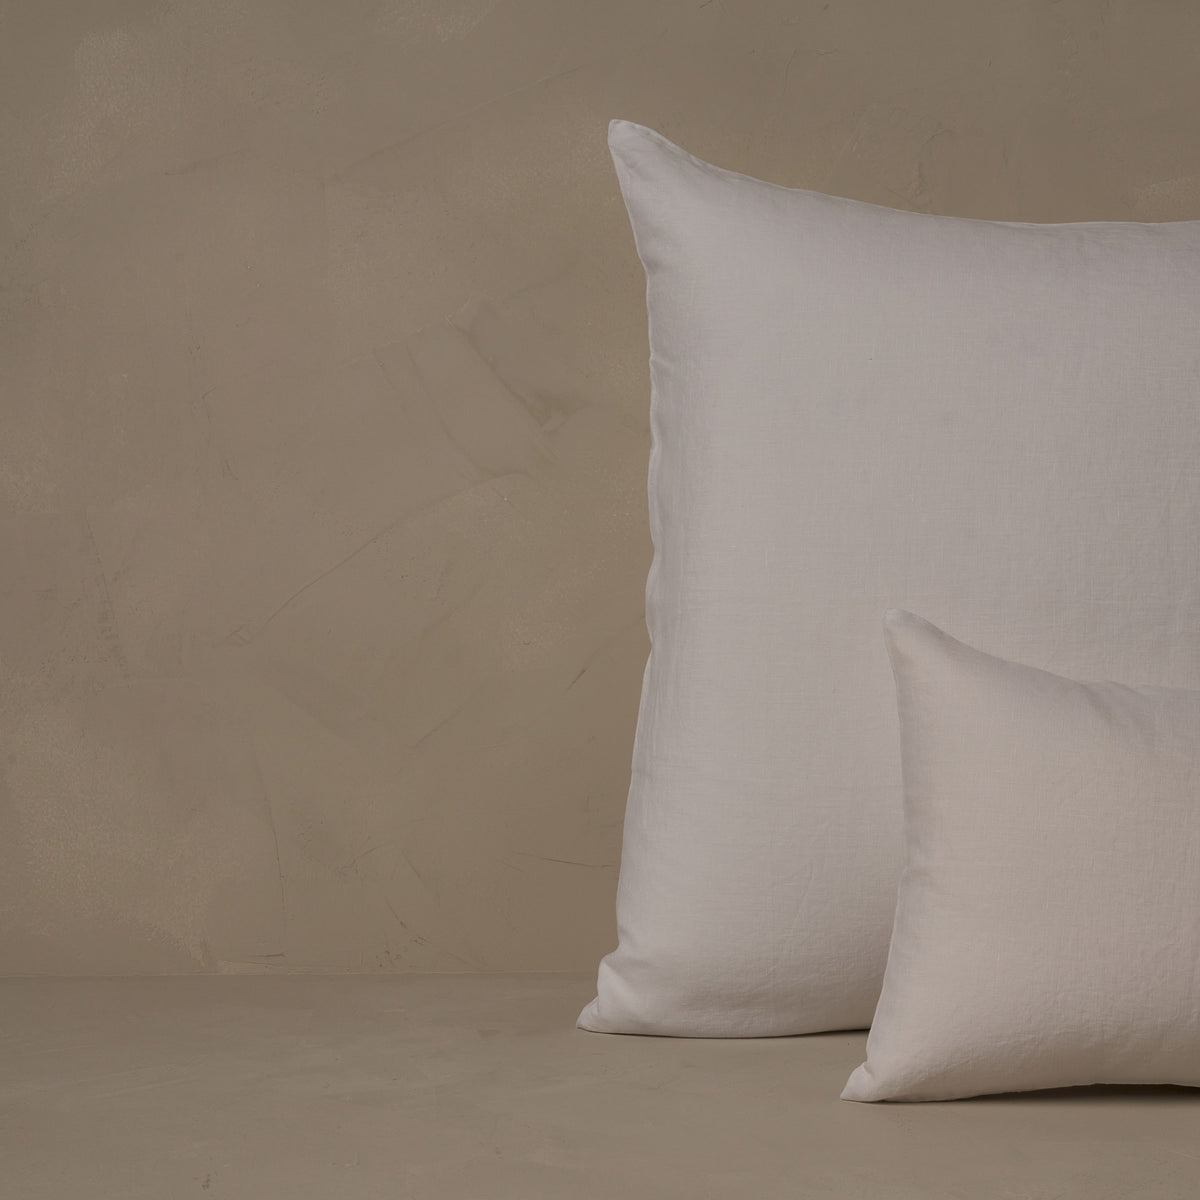 An image of a small boudoir or travel size pillow stacked in front of a large euro size pillow. The pillow cases are made in Italy of breathable and relaxed 100% linen, LETTO Classic Linen in color white. data-image-id=